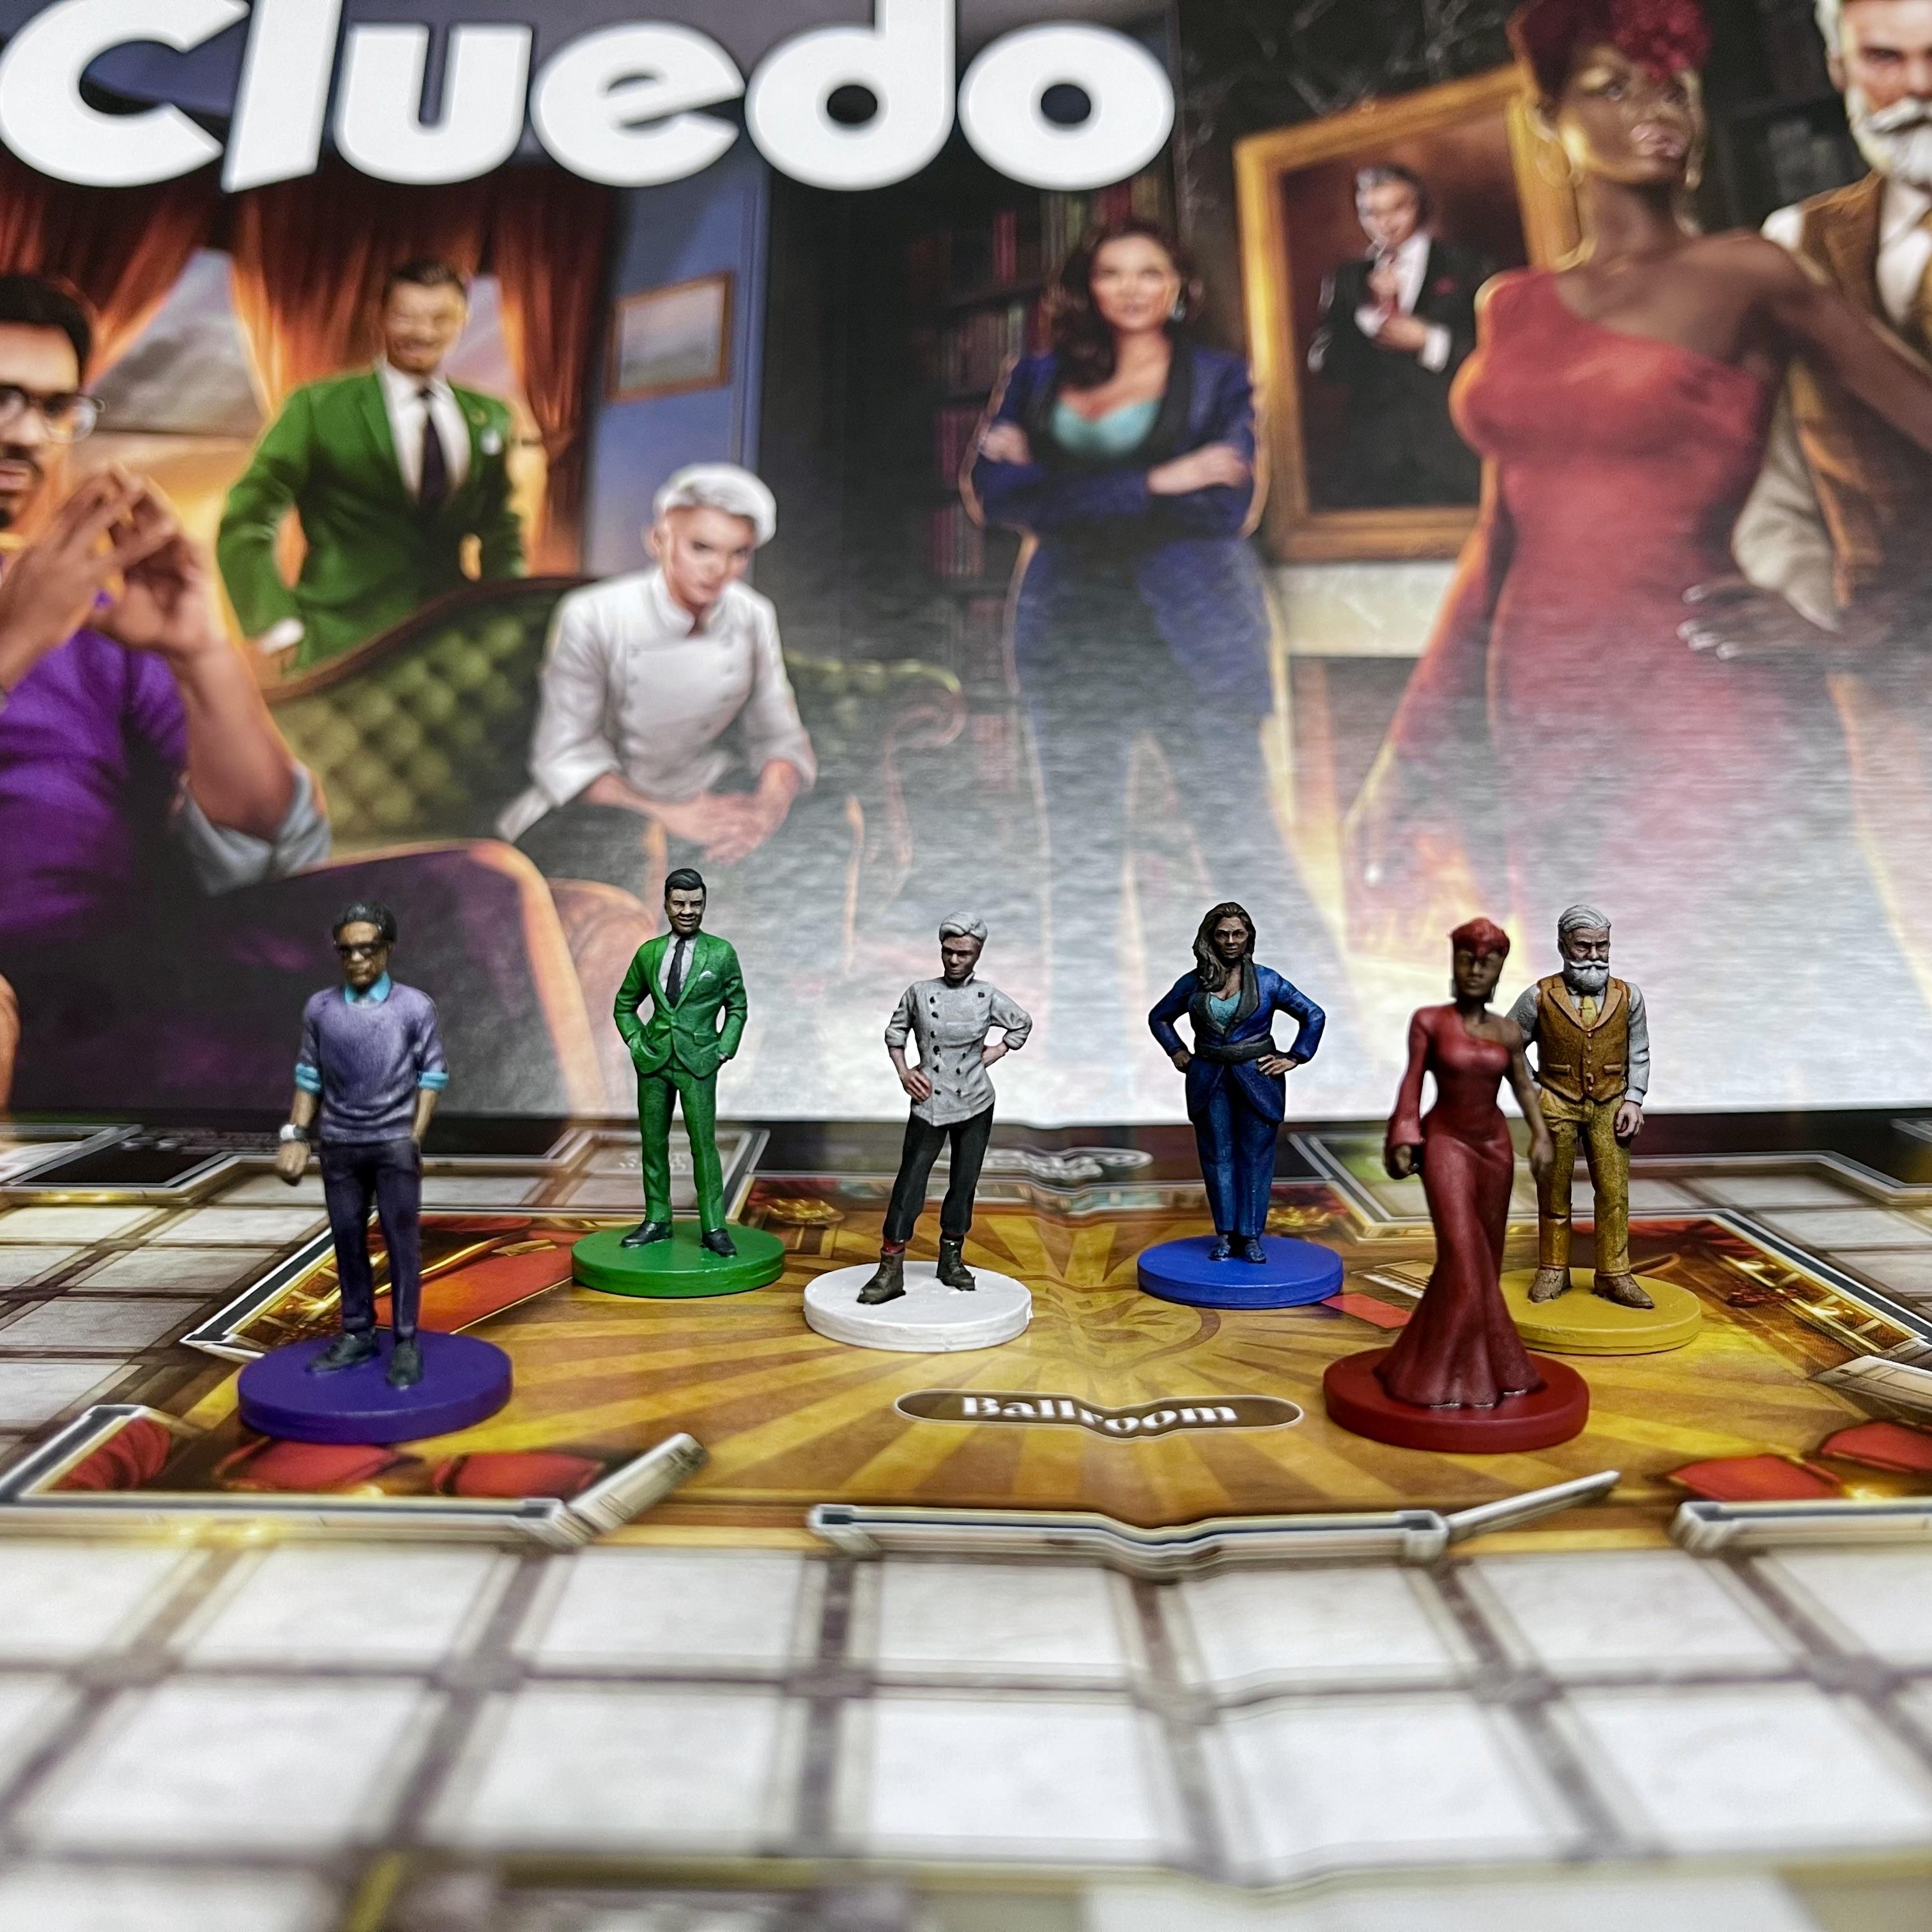 Board Game, Chef White, Cluedo, Cluedo 2023, Colonel Mustard, Mayor Green, Miss Scarlet, Professor Plum, Solicitor Peacock